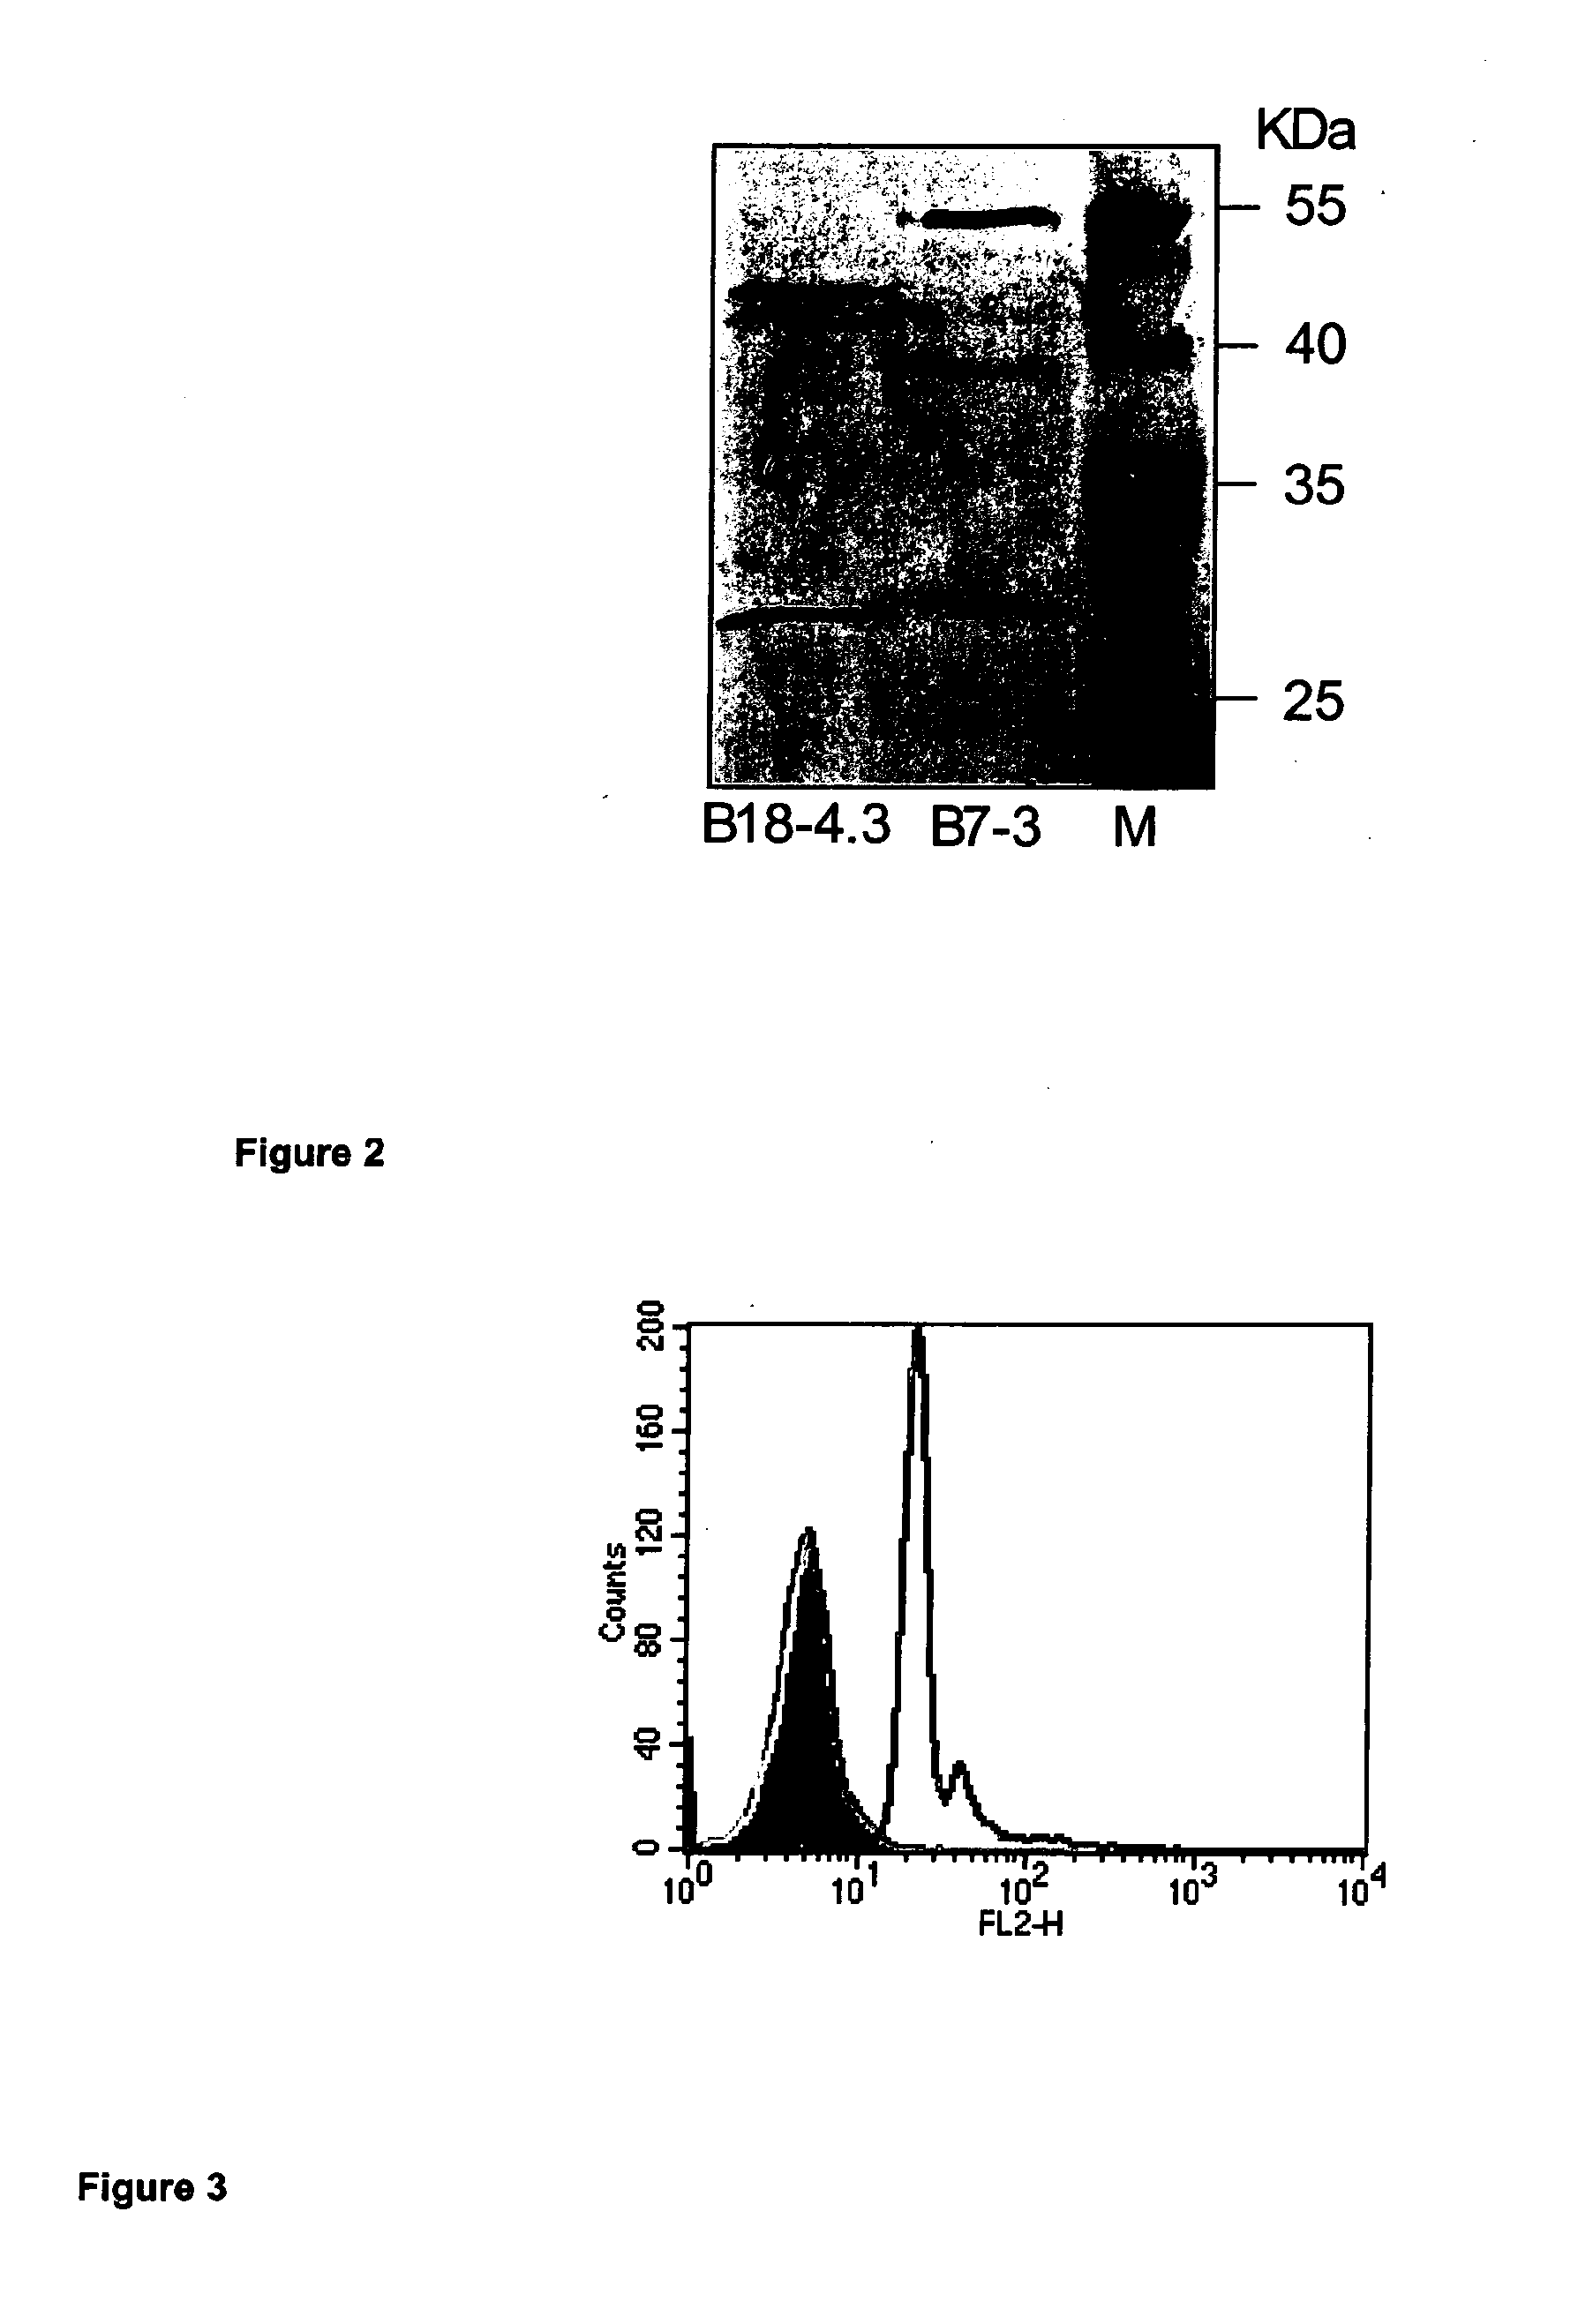 Antibodies which bind selectively to hair of animals and an antibody based drug delivery system for animals